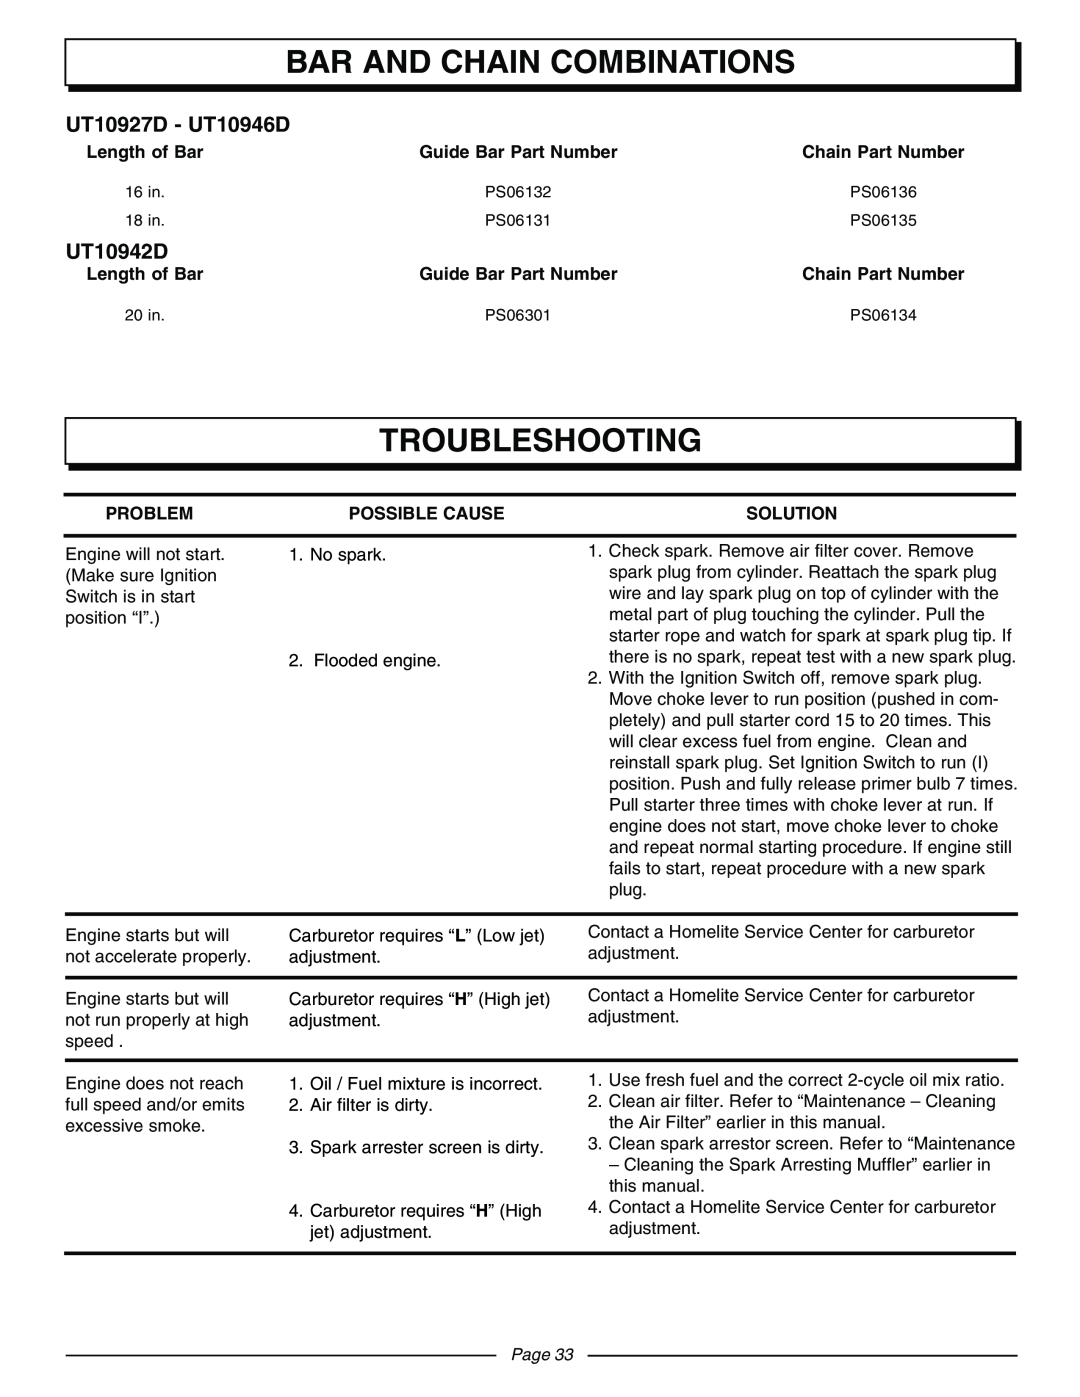 Homelite UT10942D manual Bar And Chain Combinations, Troubleshooting, UT10927D - UT10946D, Page 